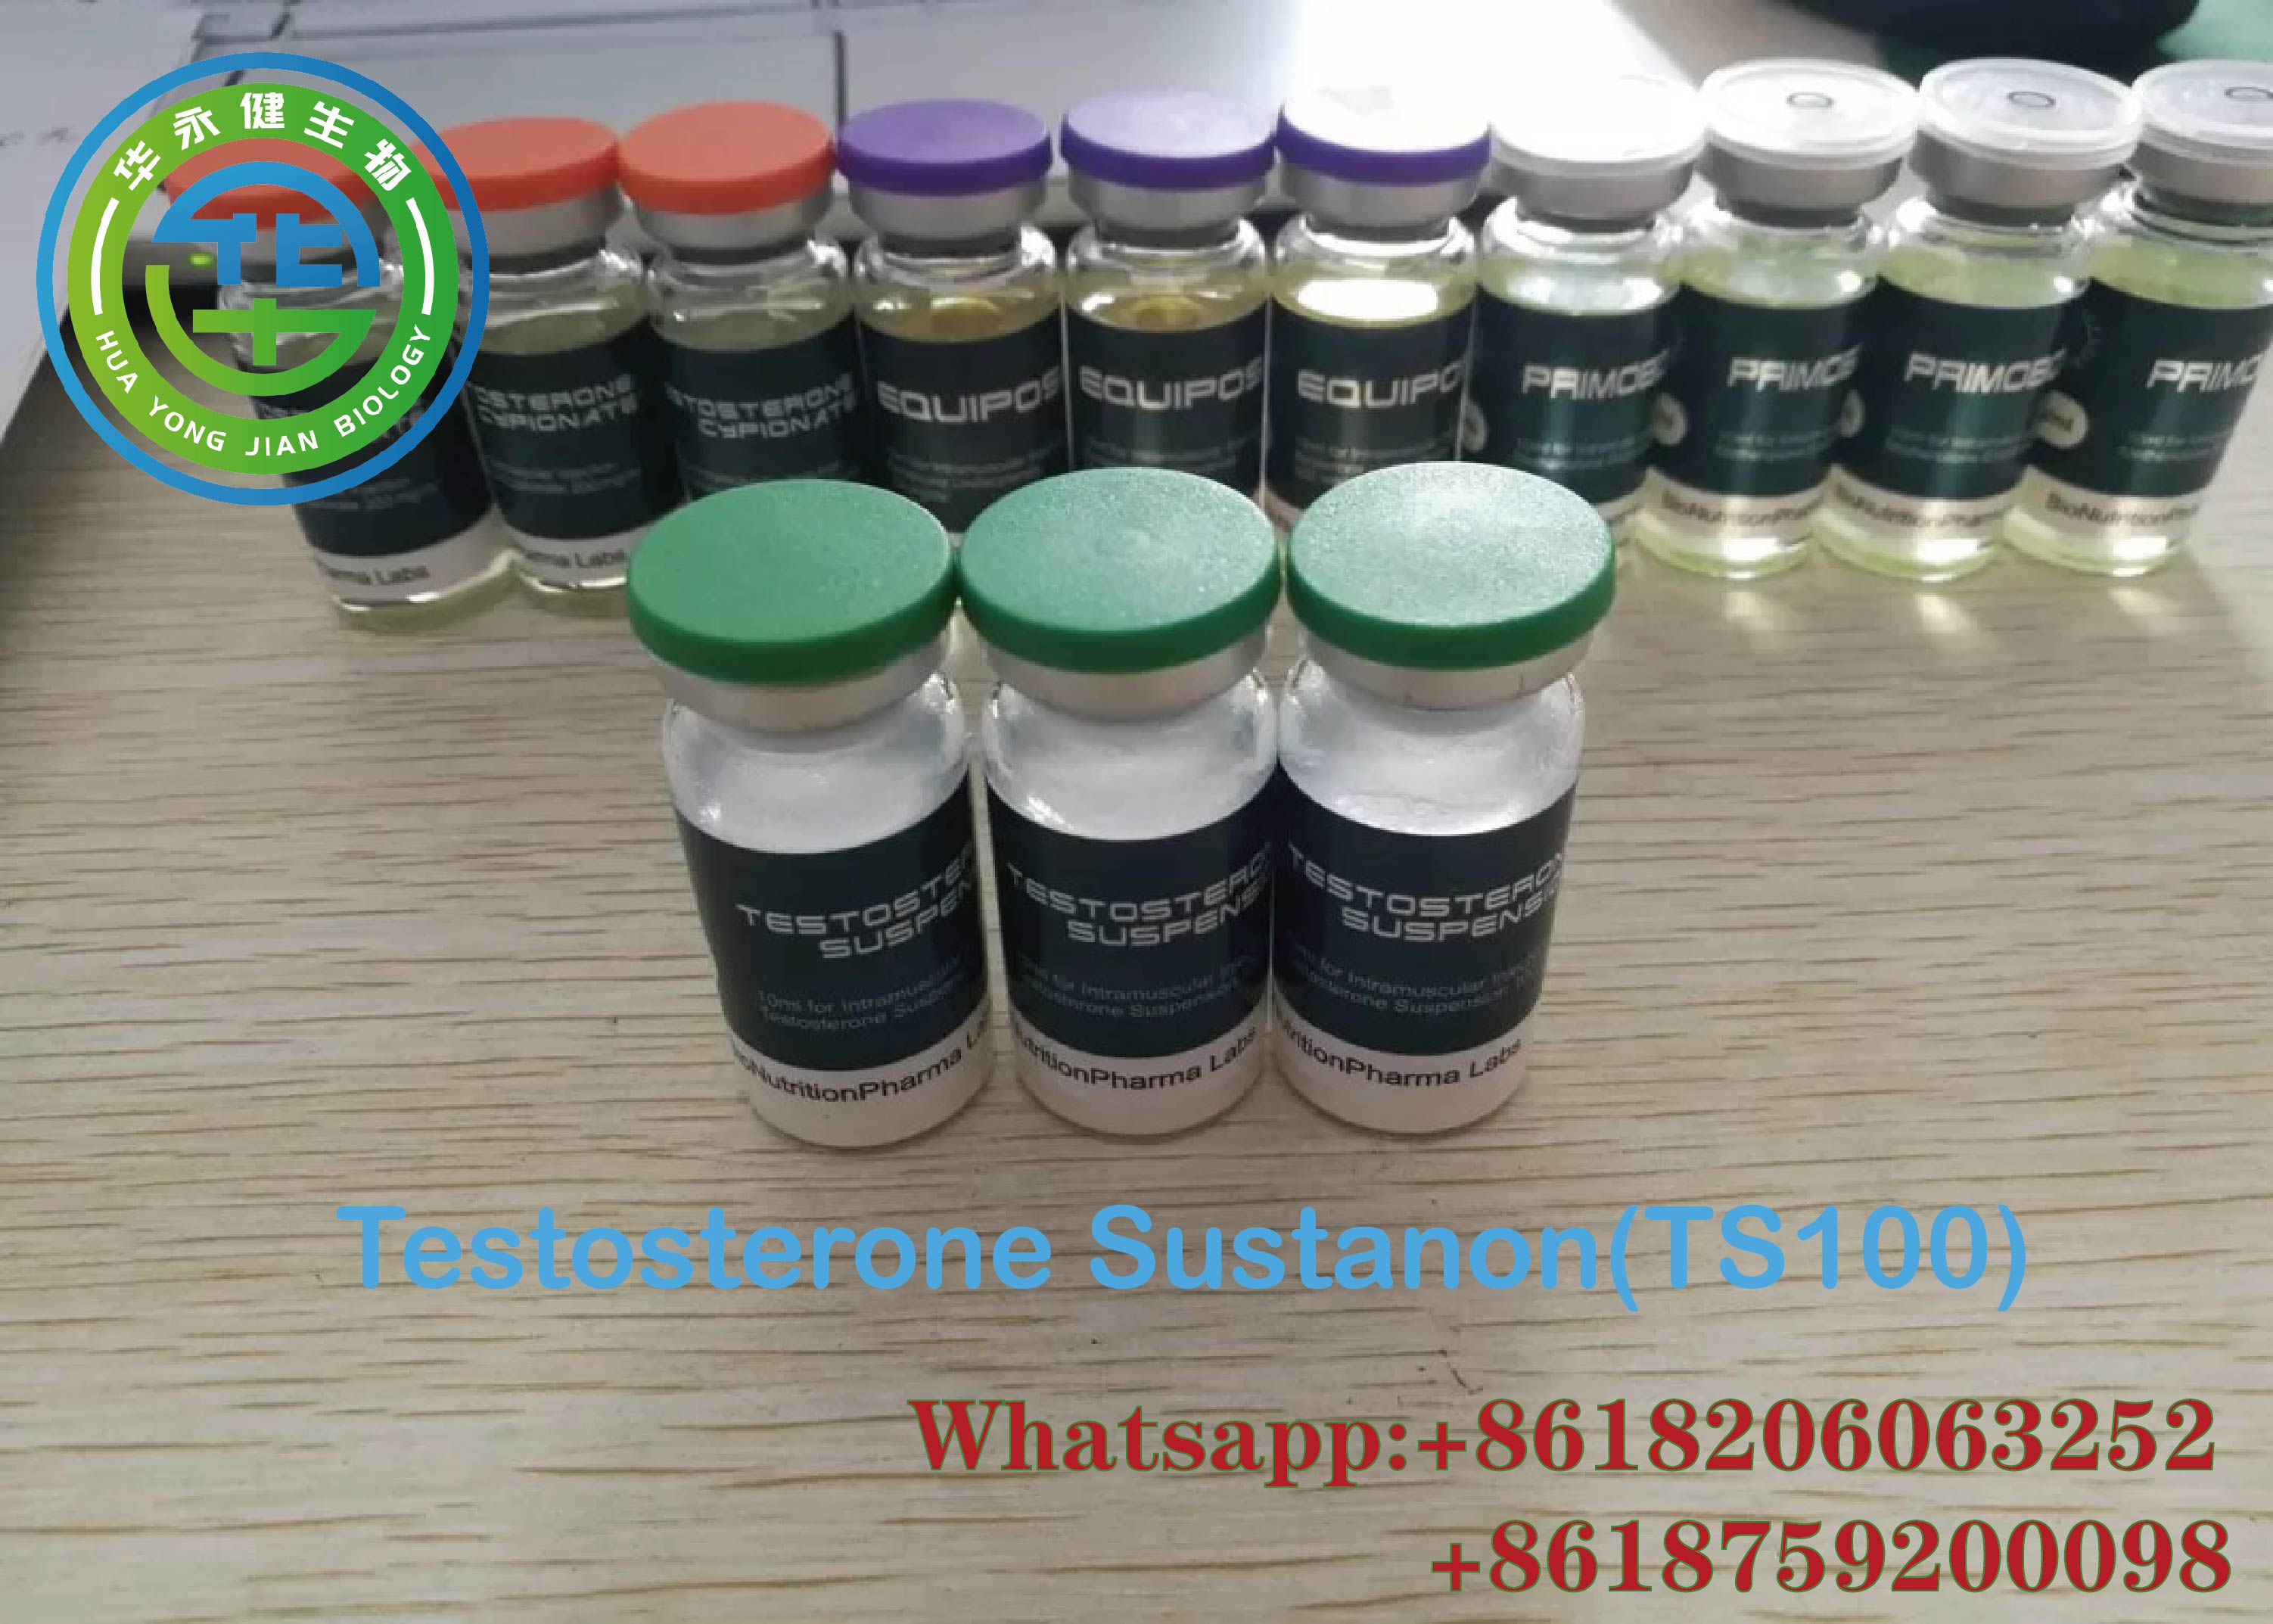 Testosterone Sustanon Yellow Liquid TS100 Injectable Anabolic Steroids 100 mg/ml Alang sa Muscle Mass Featured Image